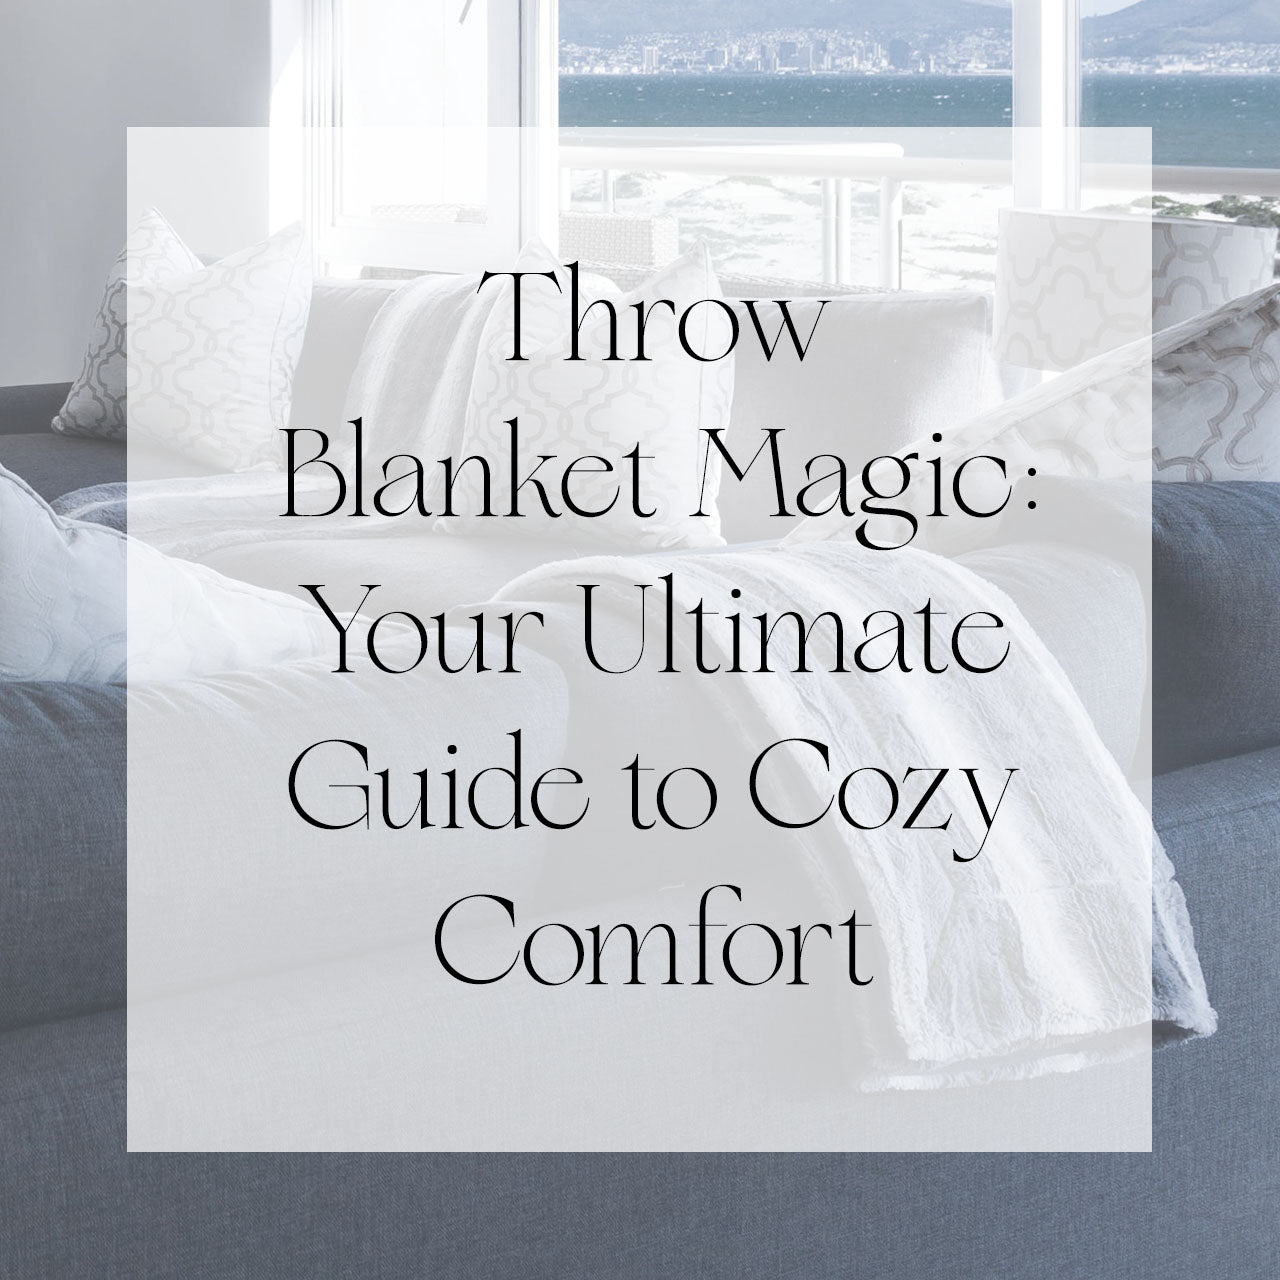 Throw Blanket Magic: Your Ultimate Guide to Cozy Comfort